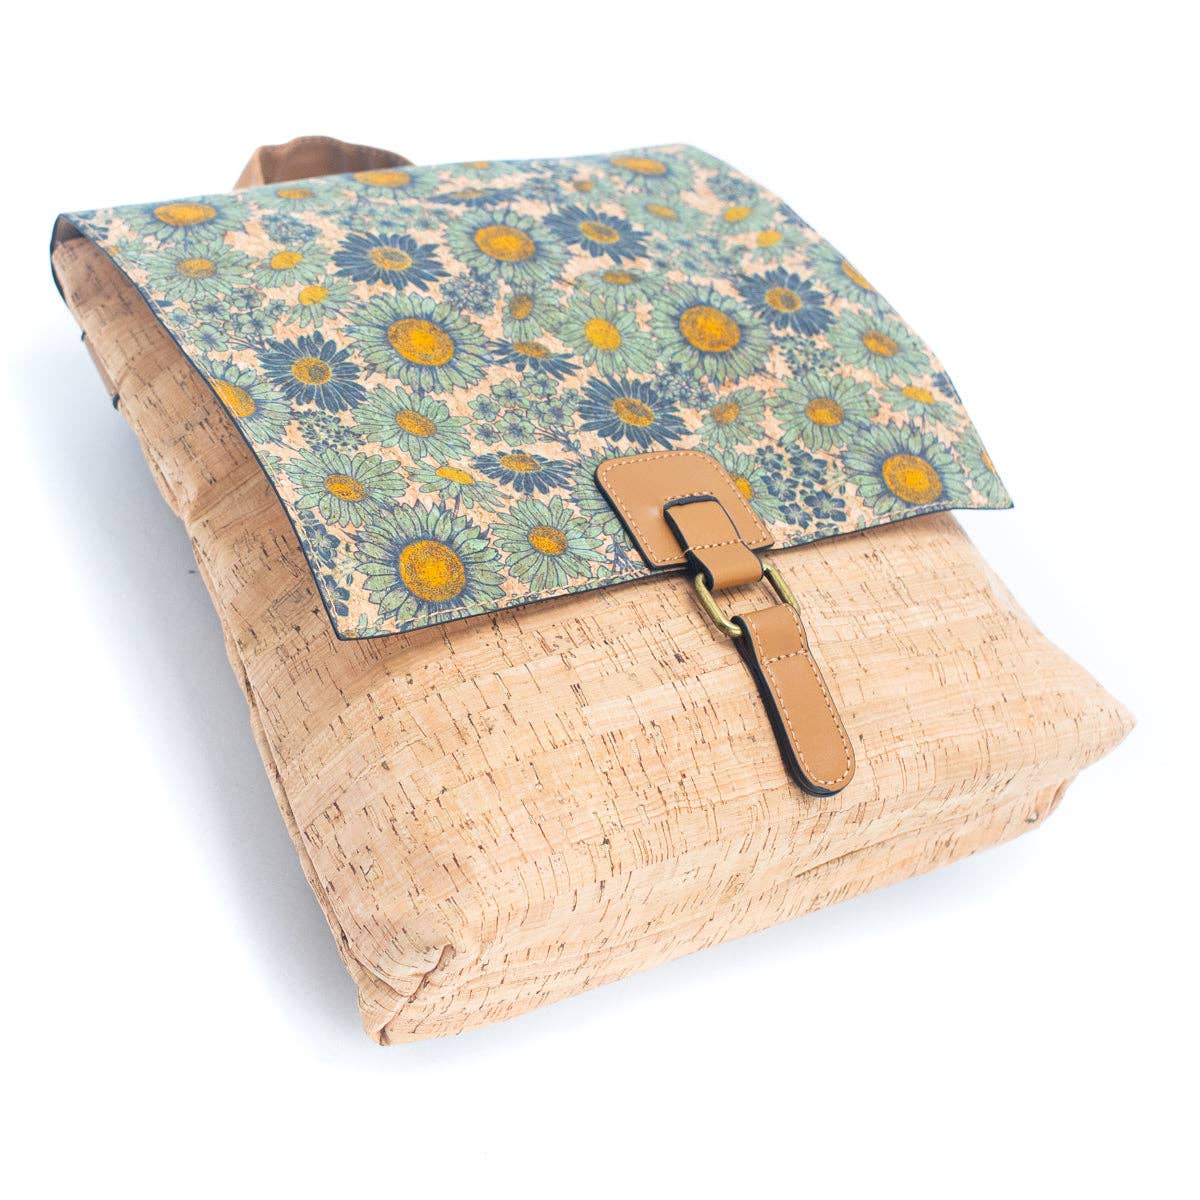 Angelco Accessories cork backpack with blue sunflower design and vegan leather straps